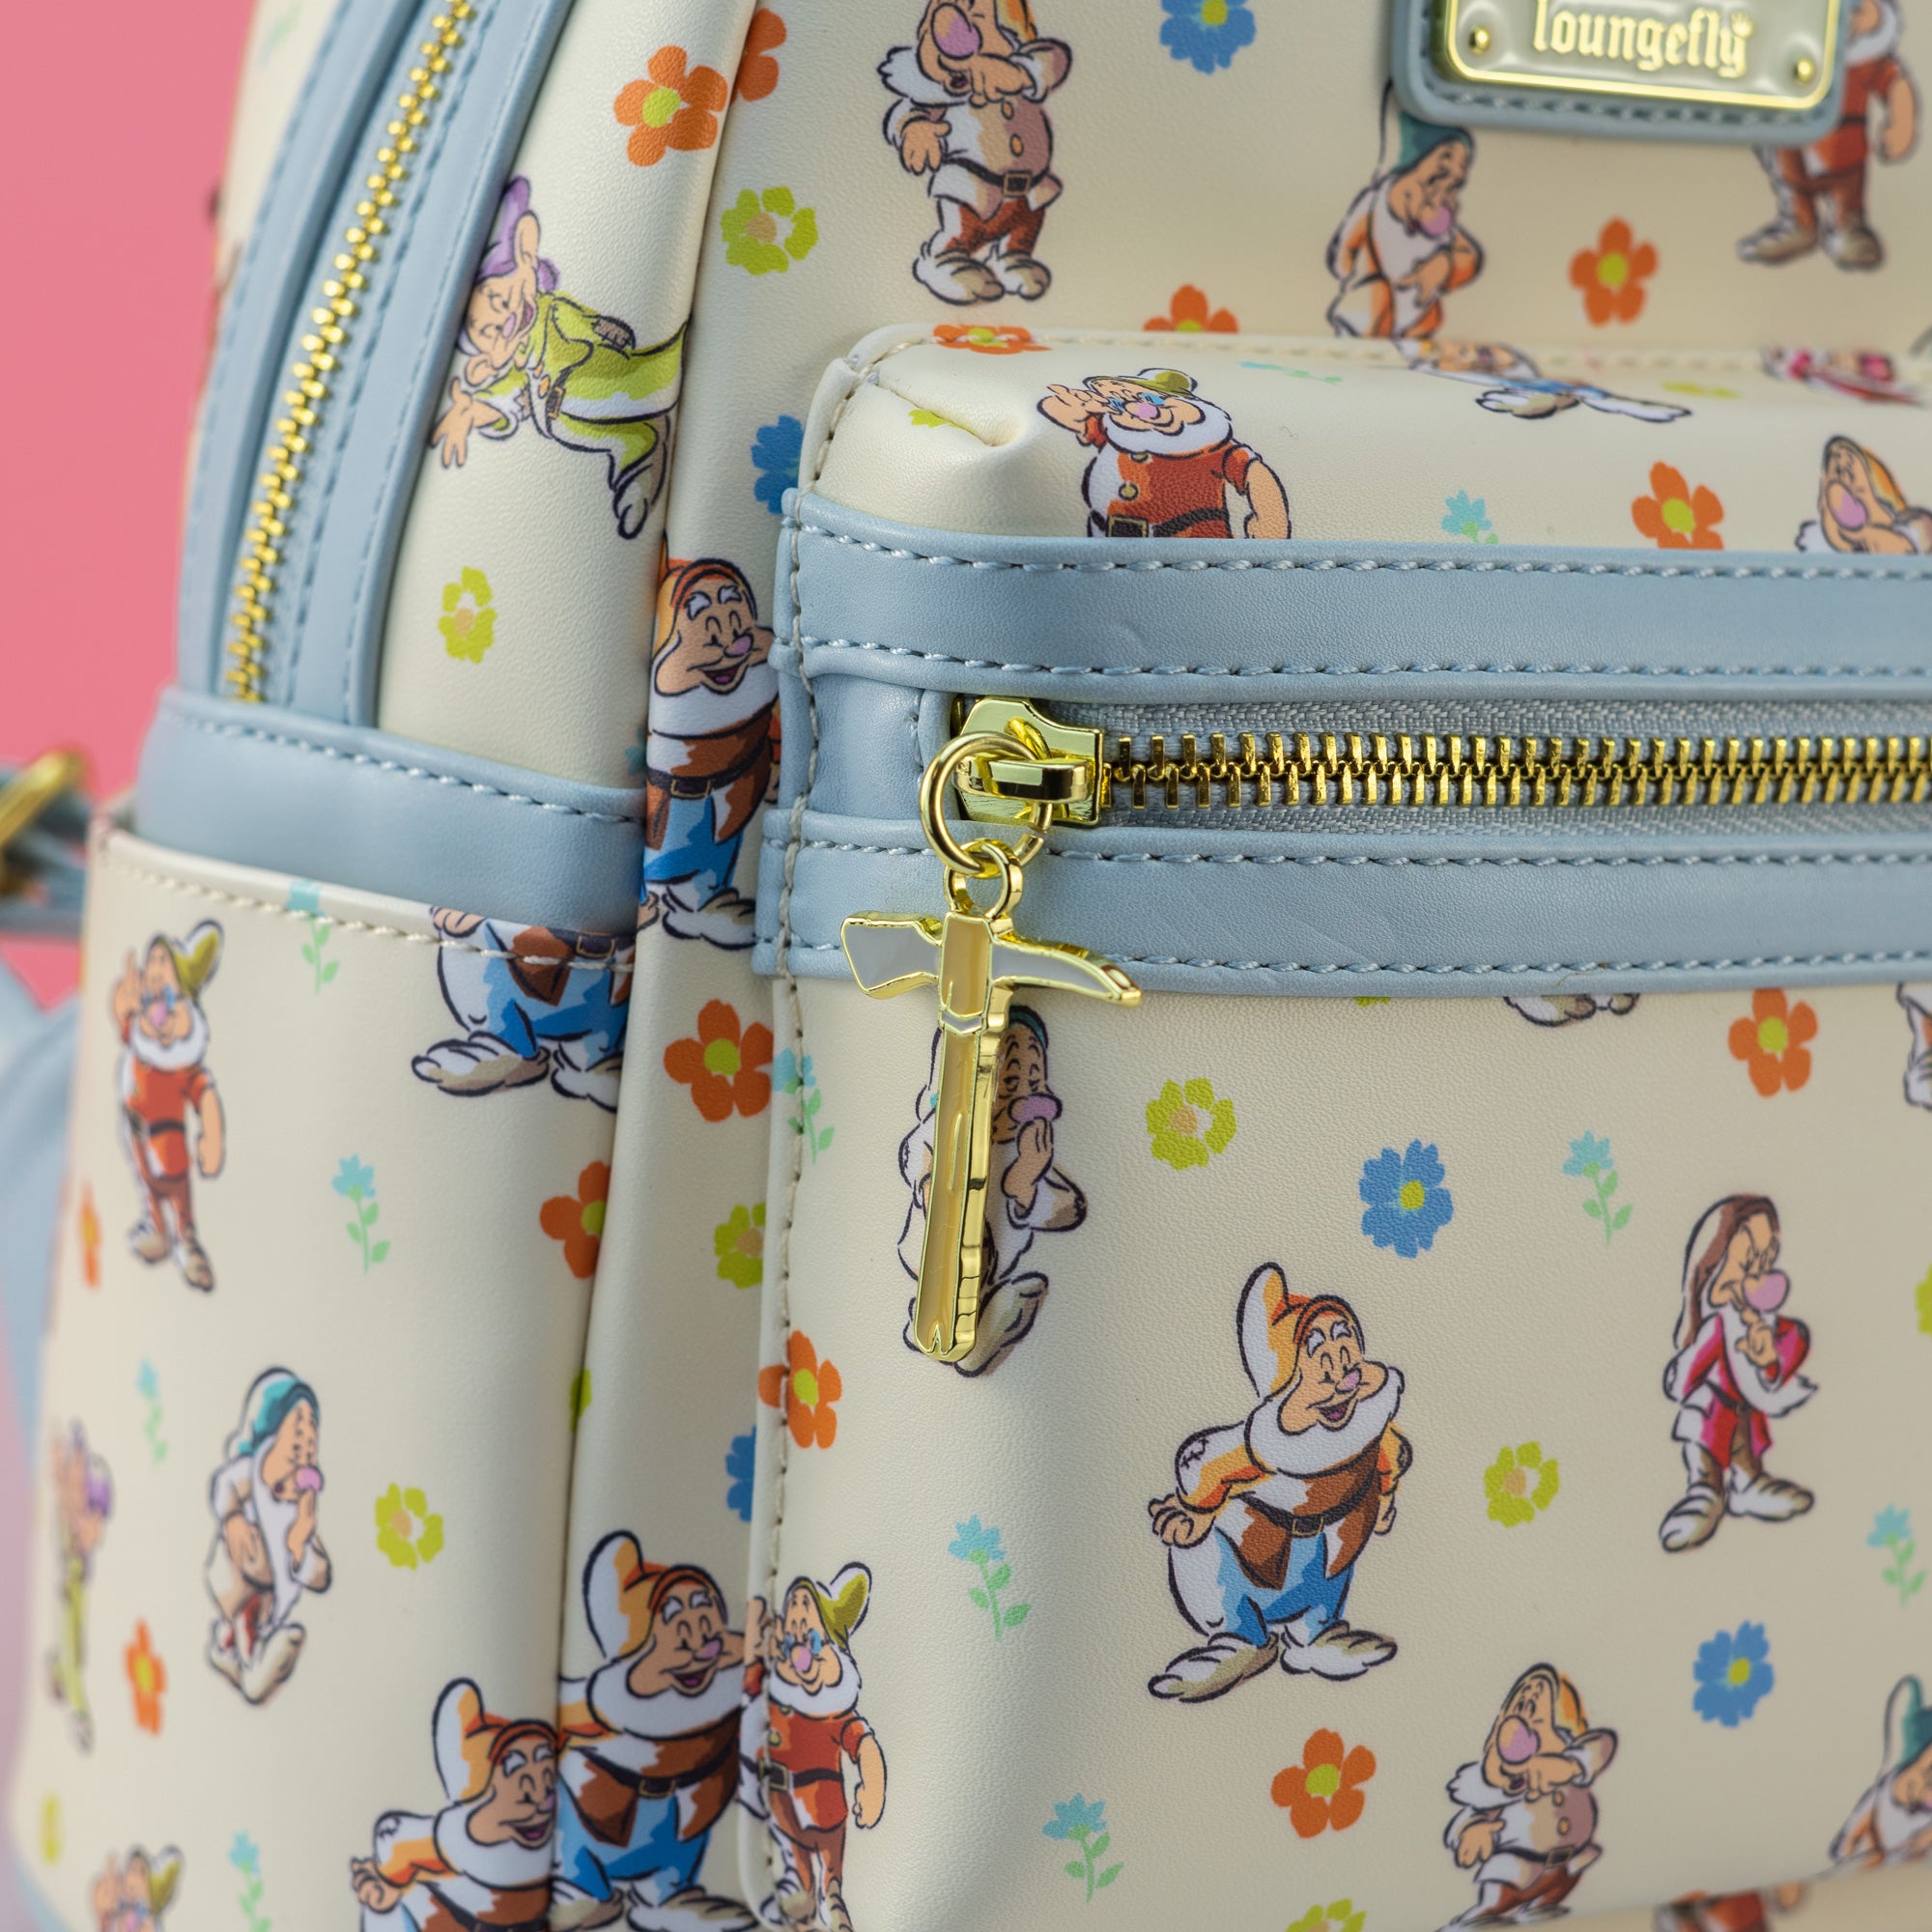 Loungefly x Disney Snow White and the Seven Dwarfs Blue AOP Mini Backpack